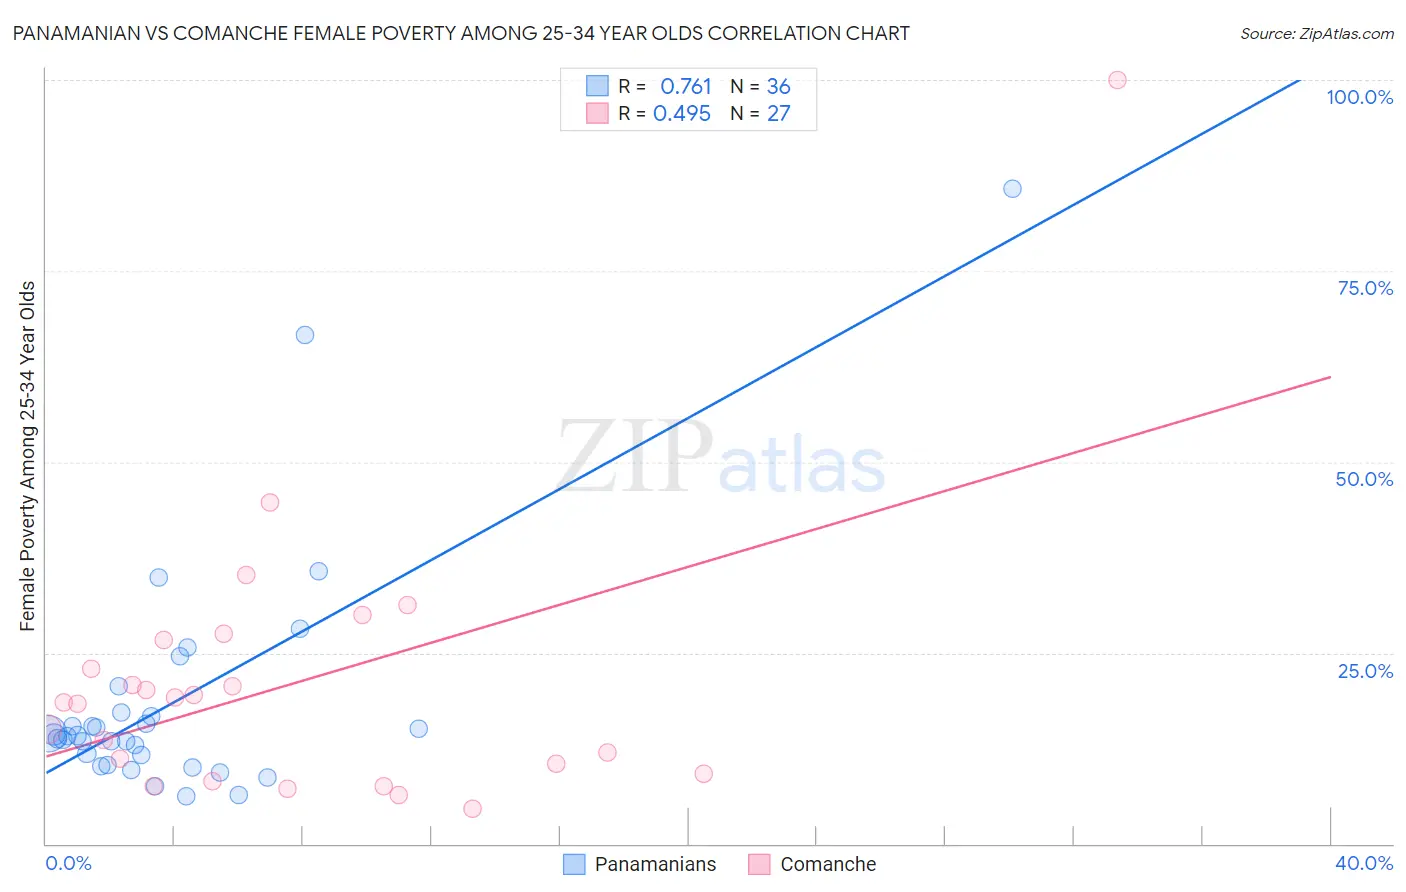 Panamanian vs Comanche Female Poverty Among 25-34 Year Olds